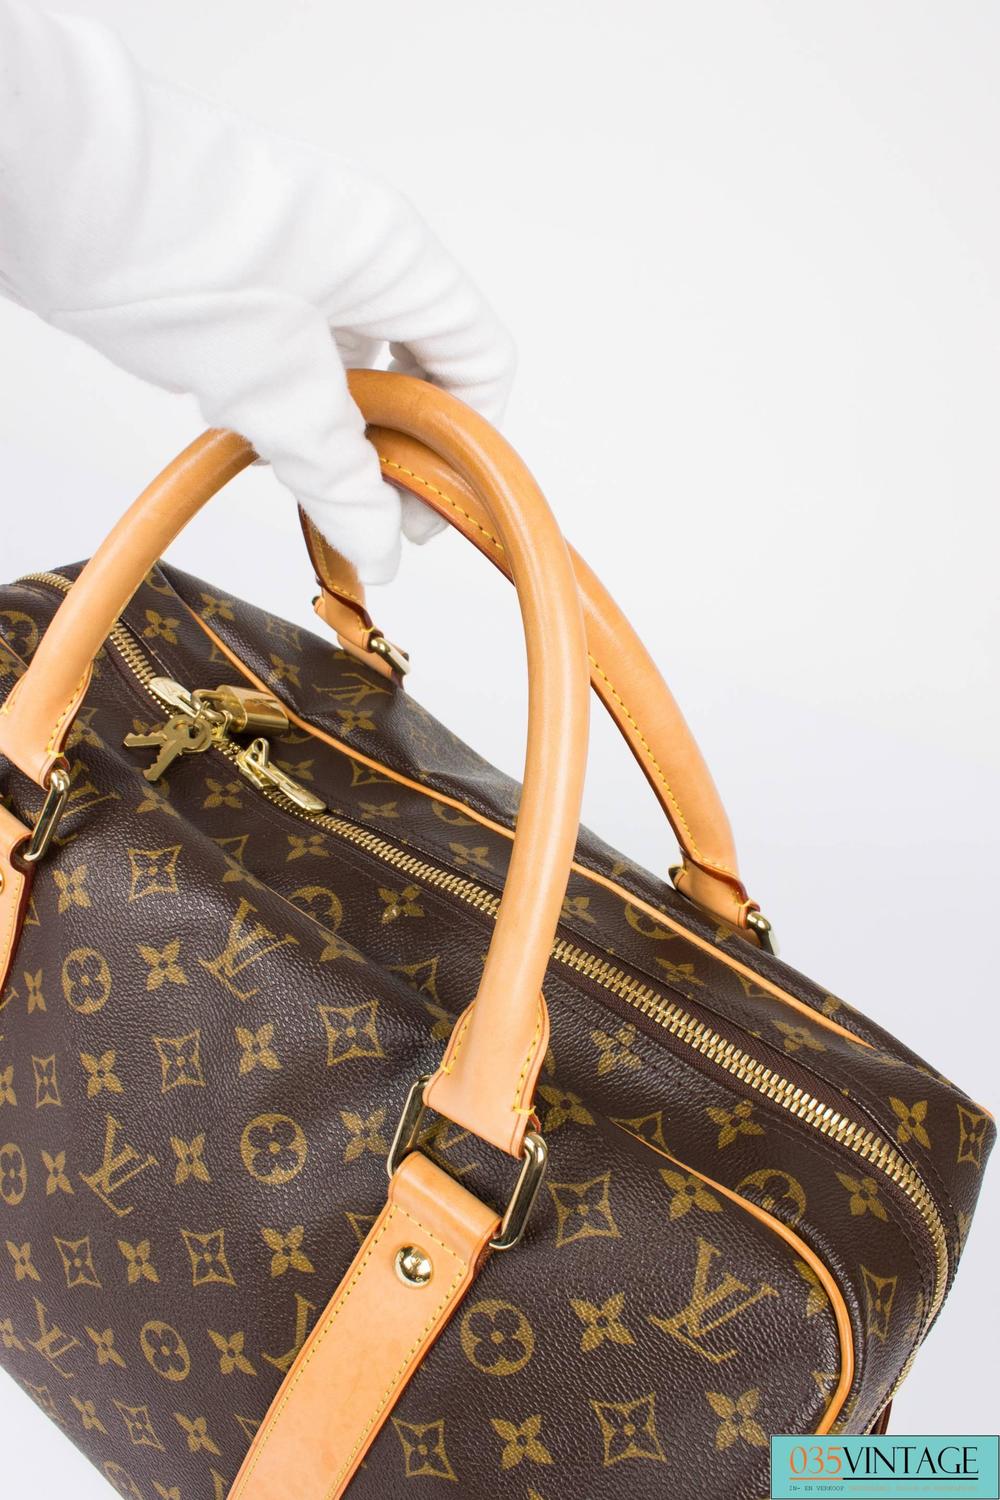 Louis Vuitton Carry All Weekend Bag - brown canvas/beige leather For Sale at 1stdibs